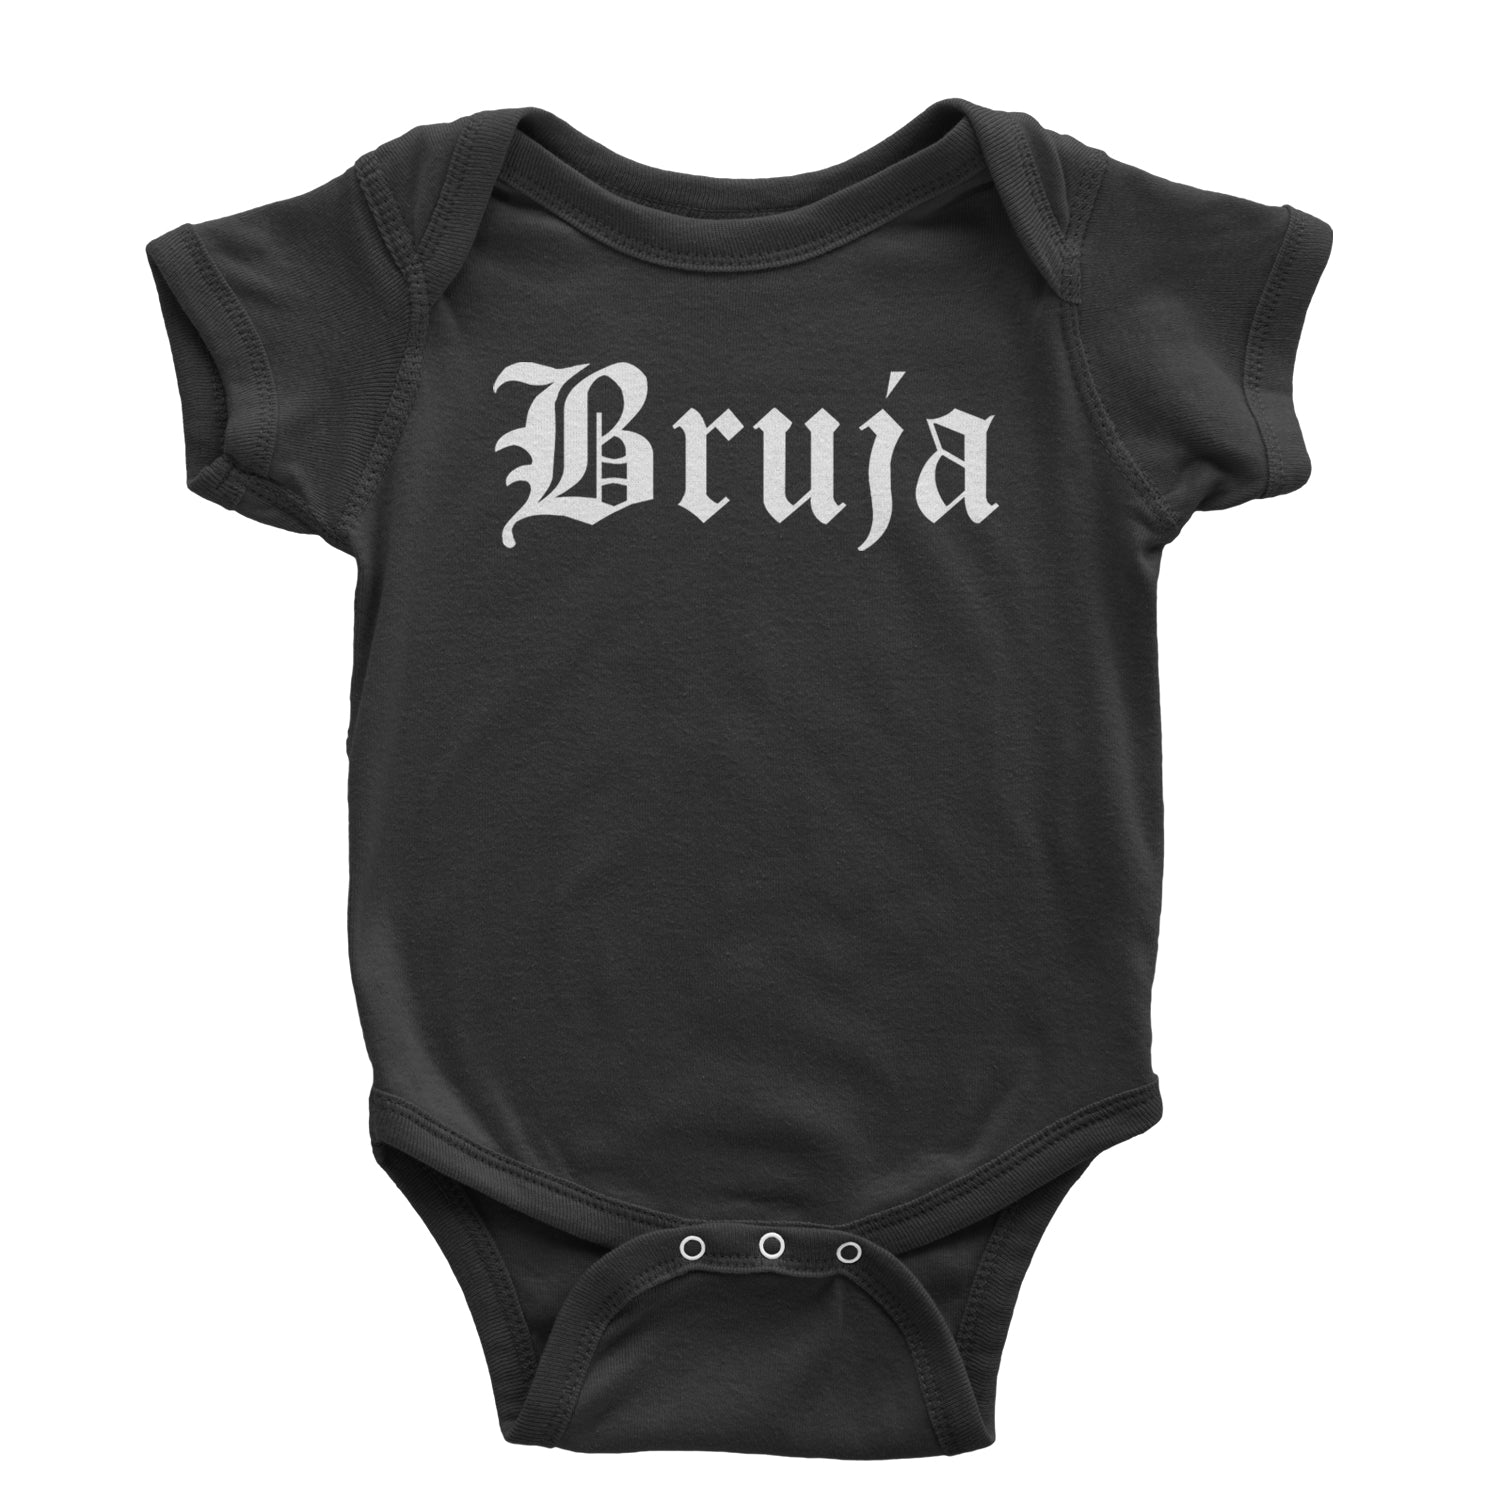 Bruja Gothic Spanish Witch Infant One-Piece Romper Bodysuit and Toddler T-shirt